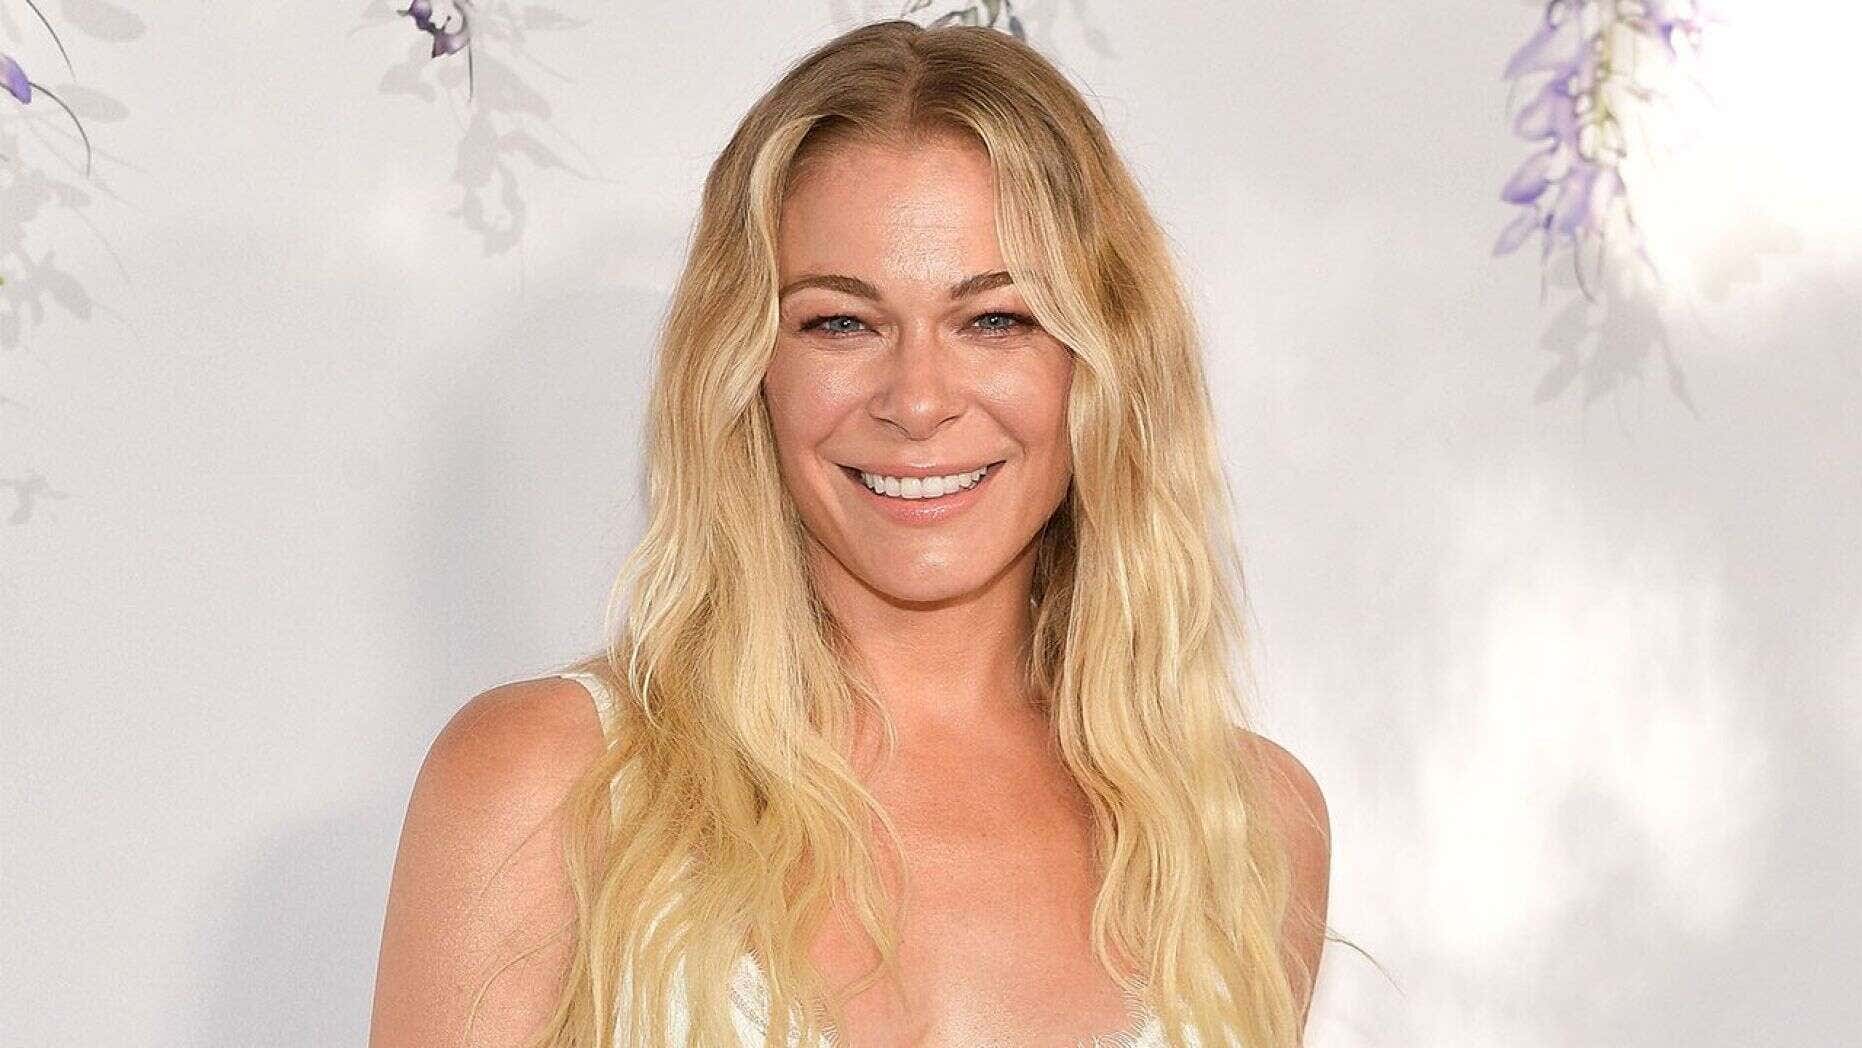 LeAnn Rimes says she had ‘some pretty heavy depression’ during the pandemic: ‘This is the human journey’